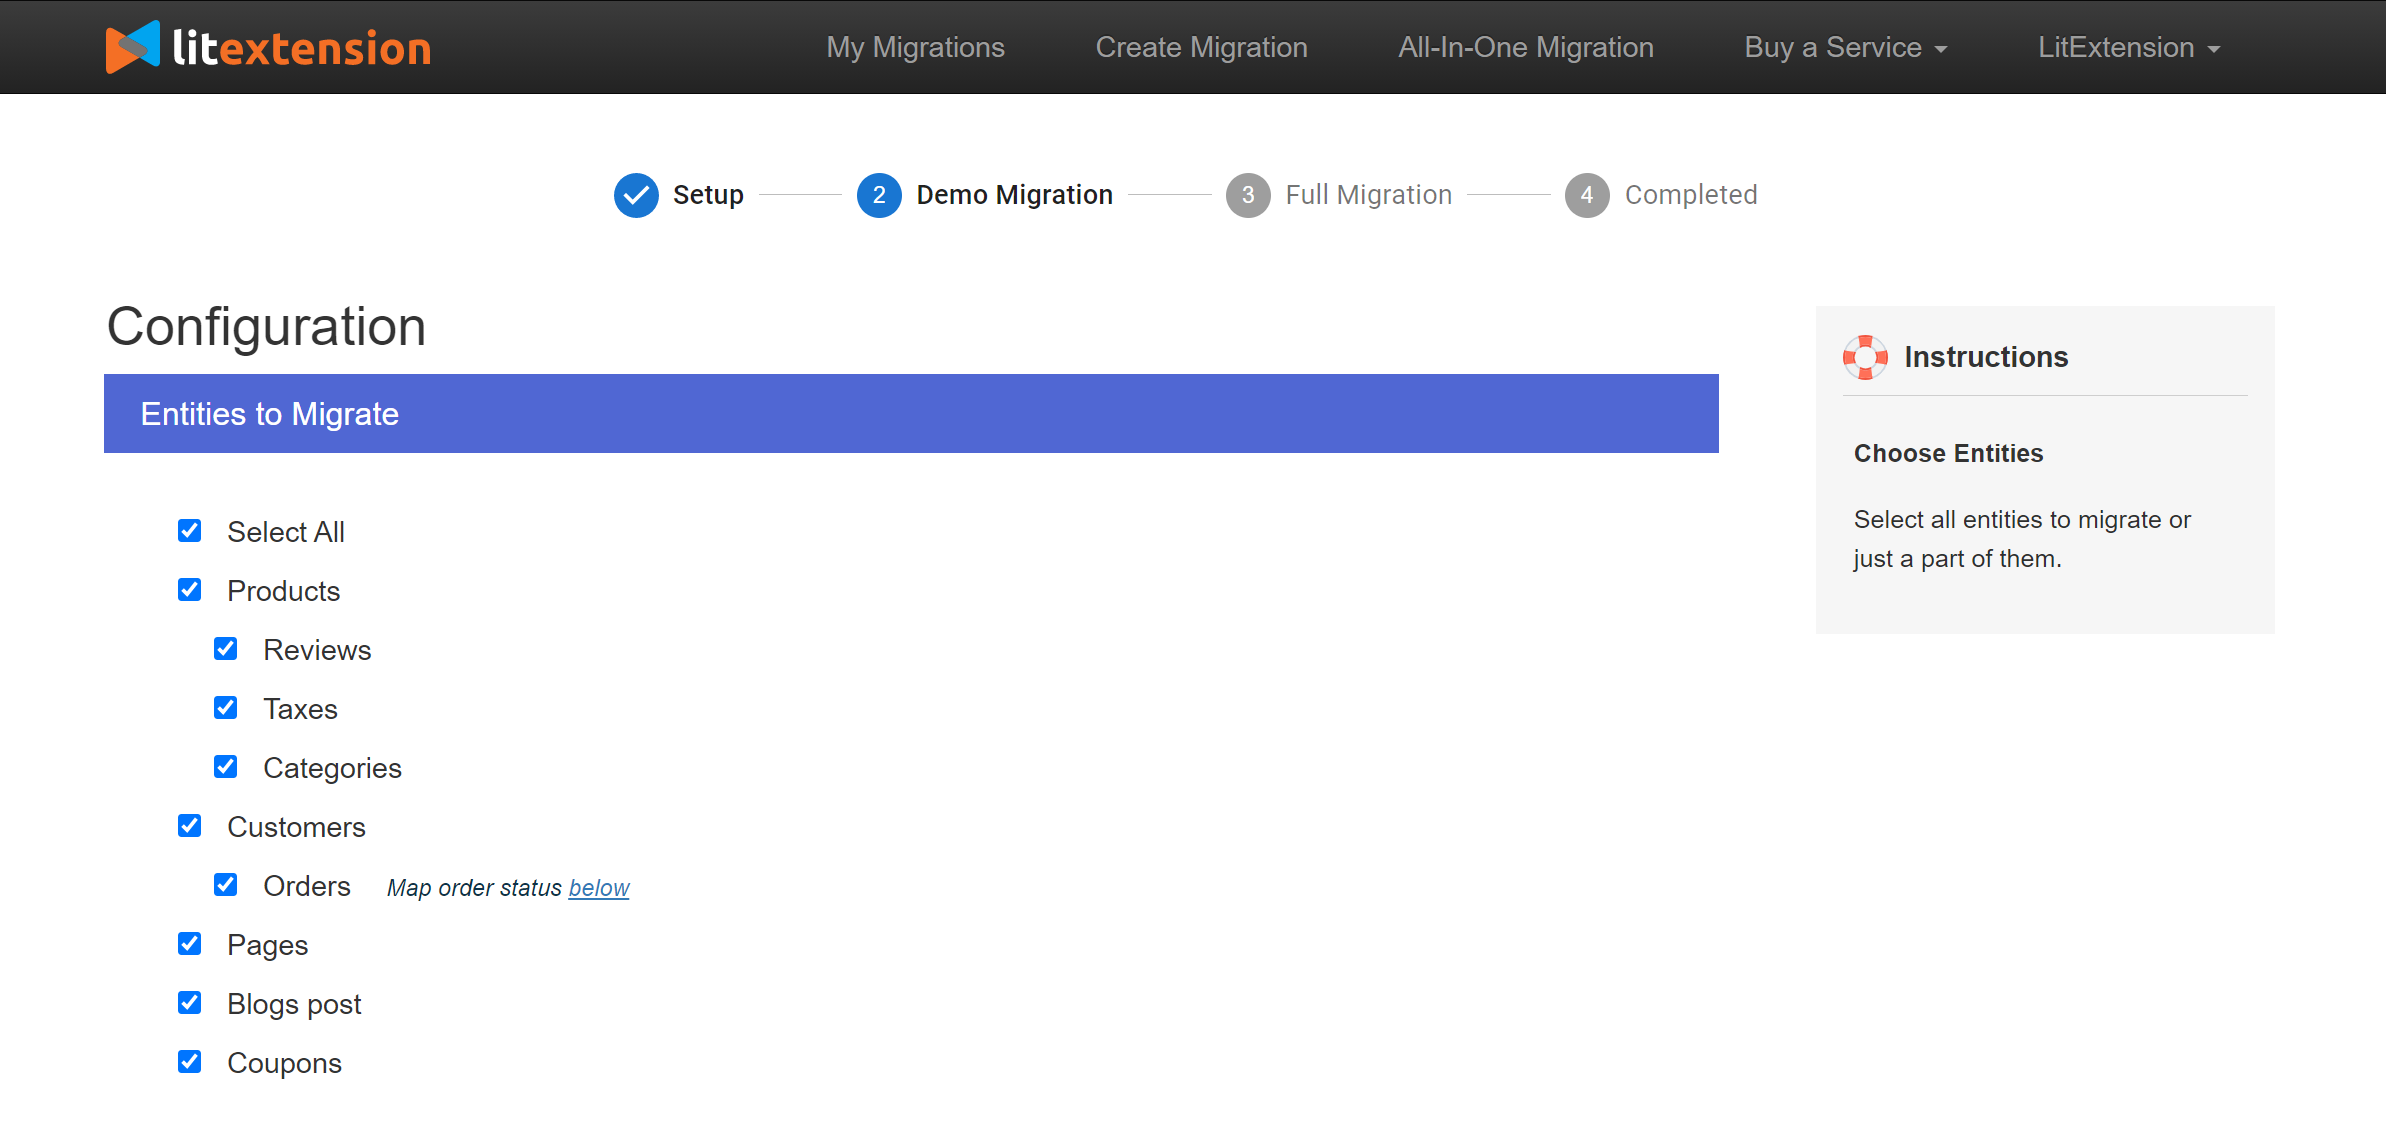 Select entities to migrate